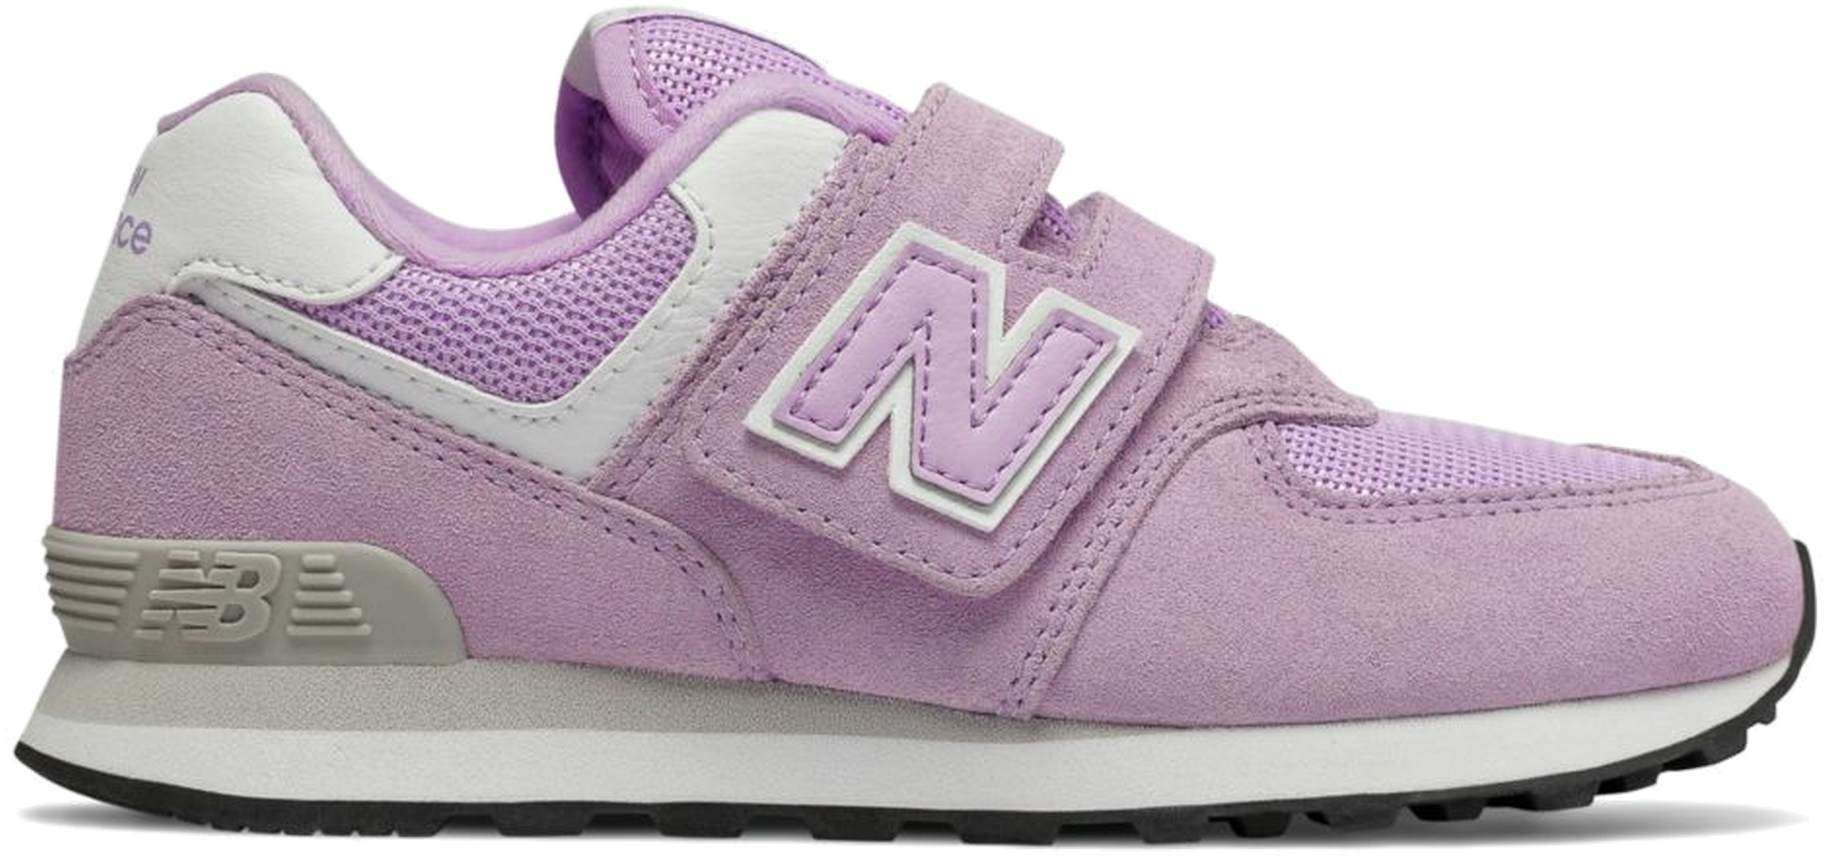 New Balance Hook and Loop 574 Cashmere/White